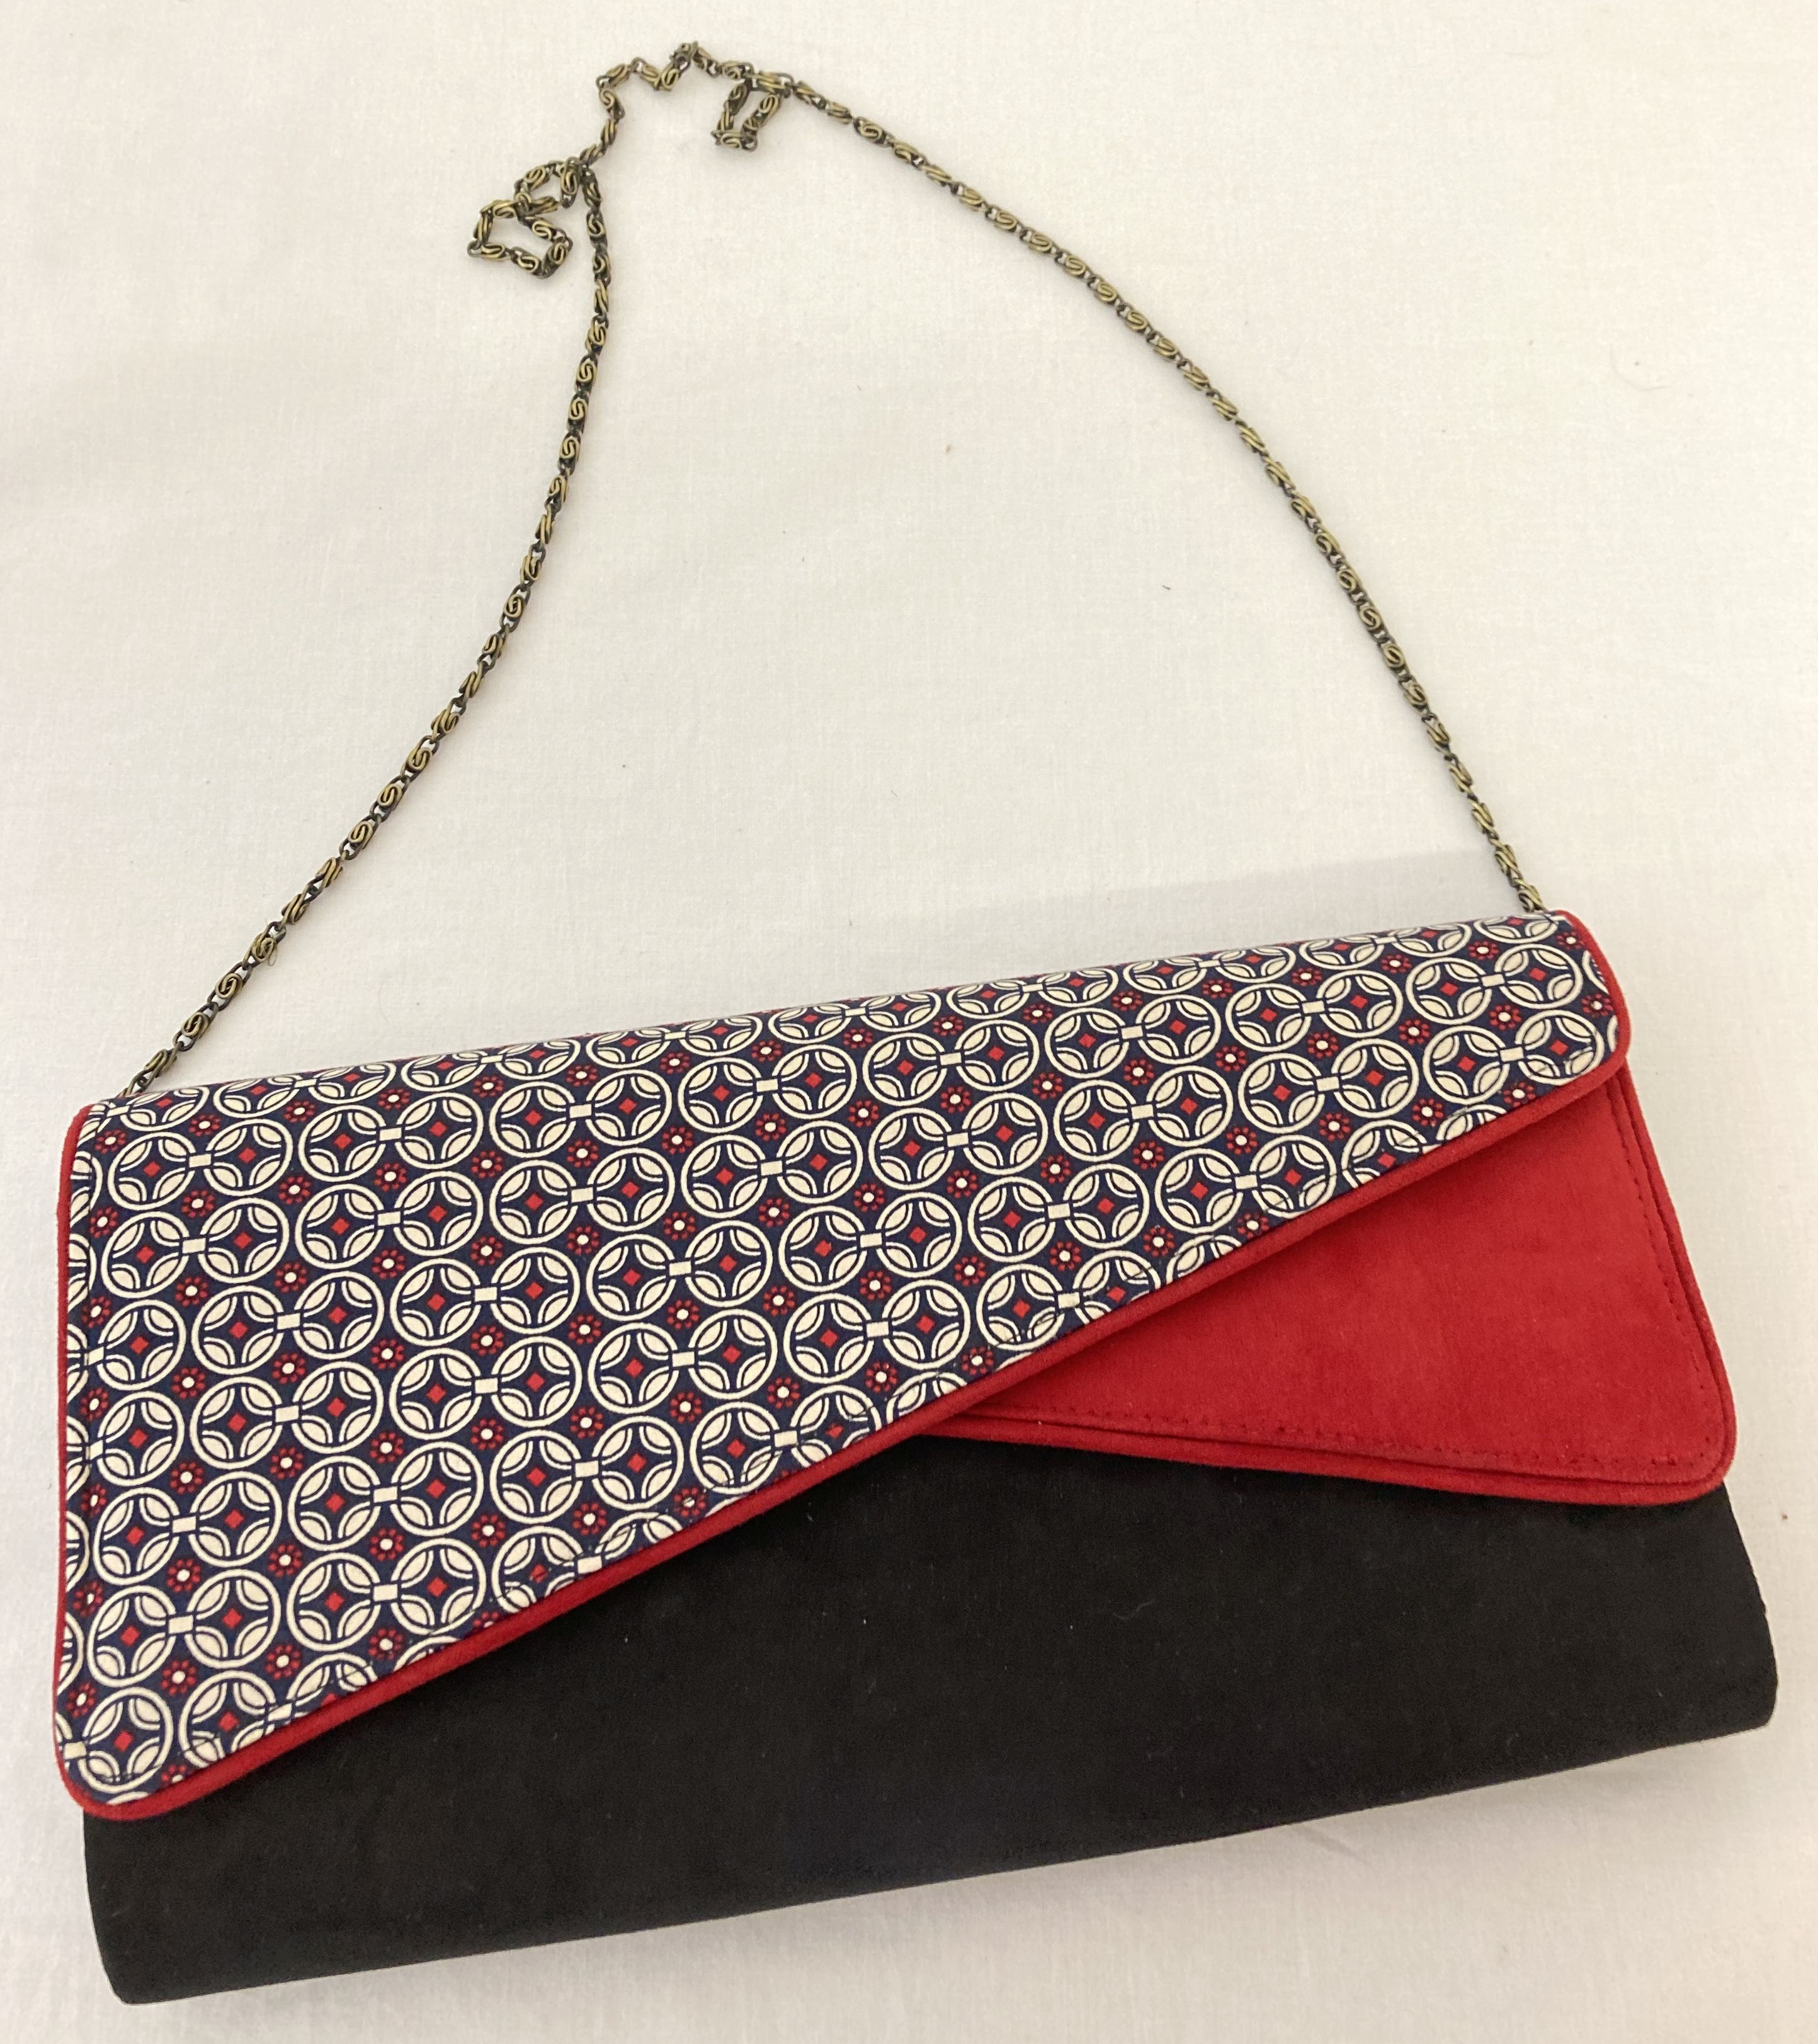 A Ruby Shoo faux suede clutch/shoulder bag in red, black and geometric print. - Image 2 of 5